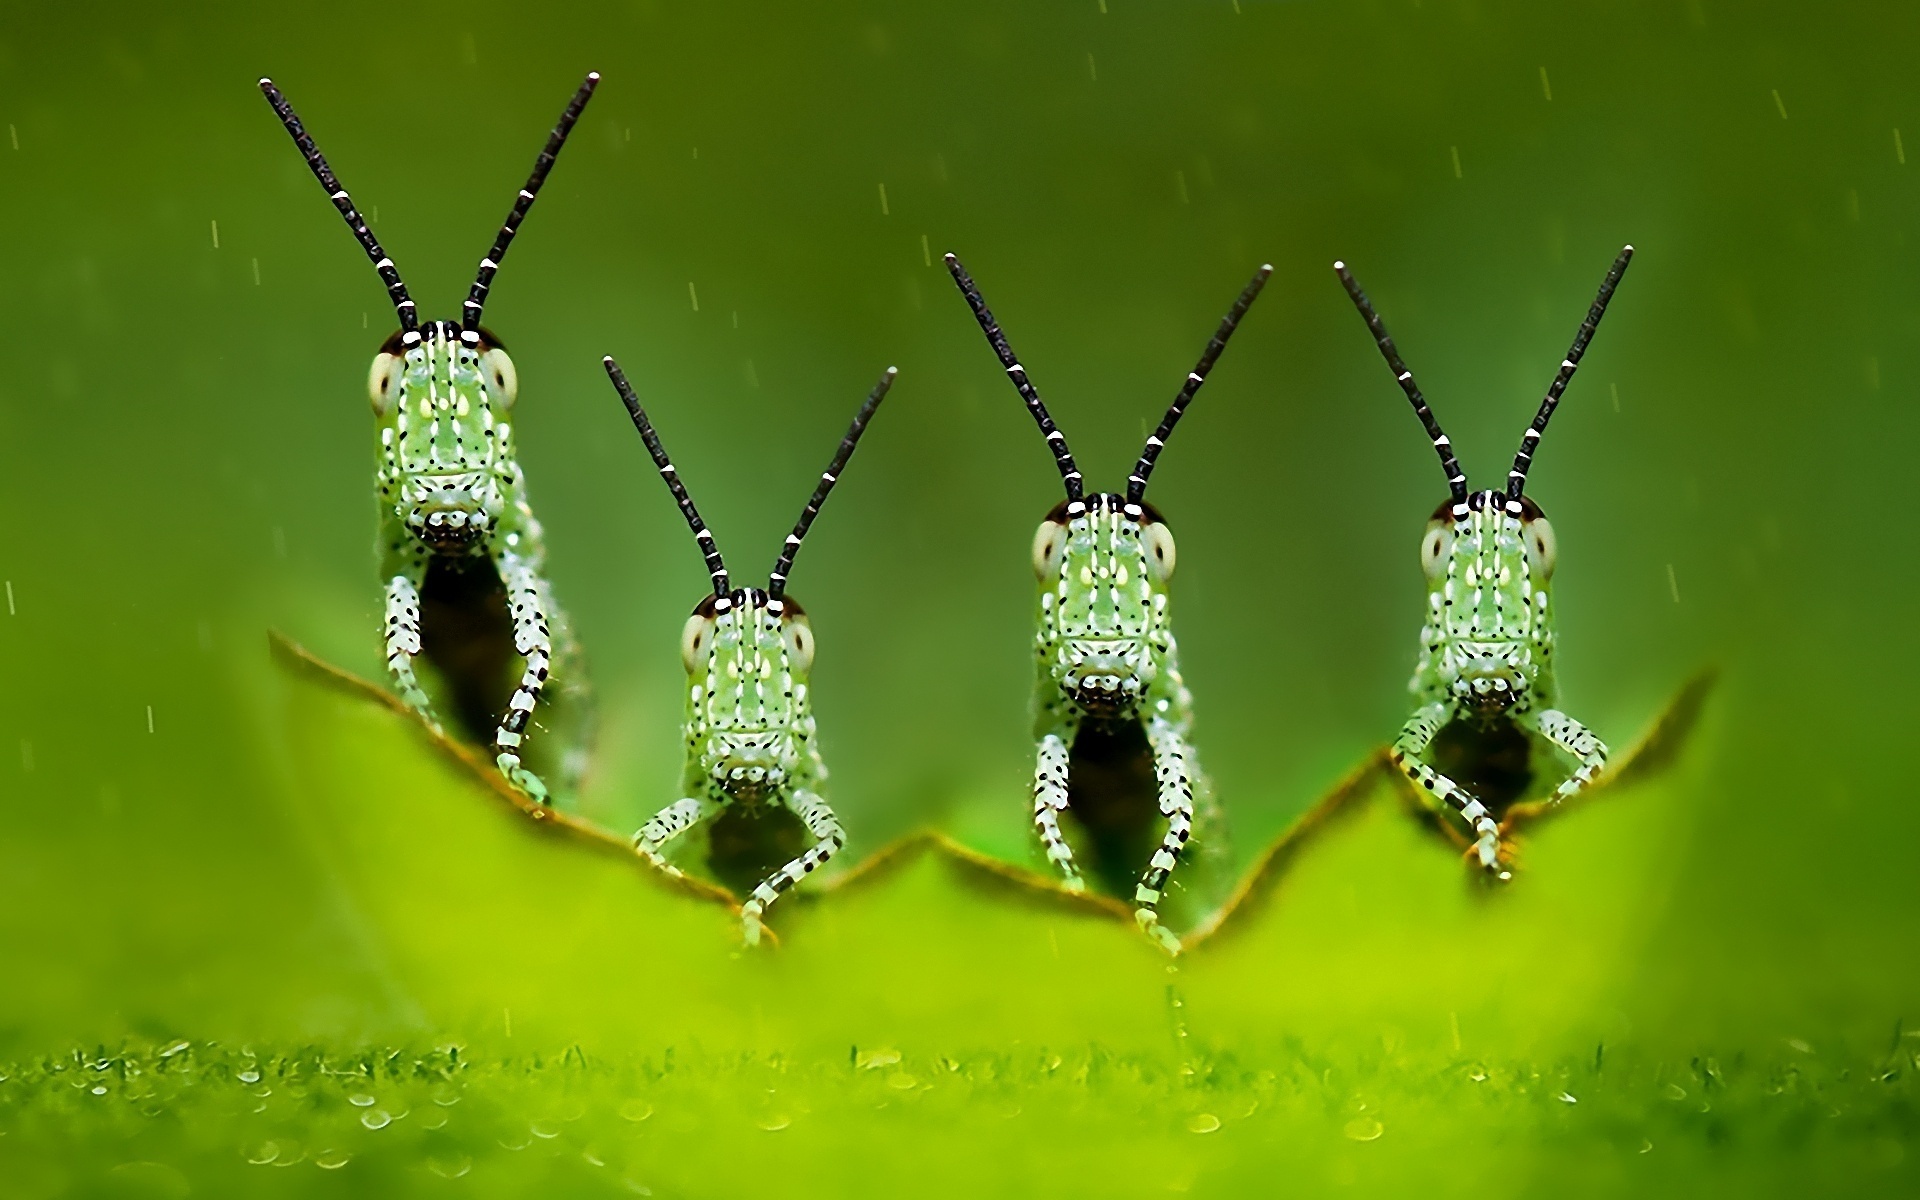 Download Insect wallpapers for mobile phone free Insect HD pictures